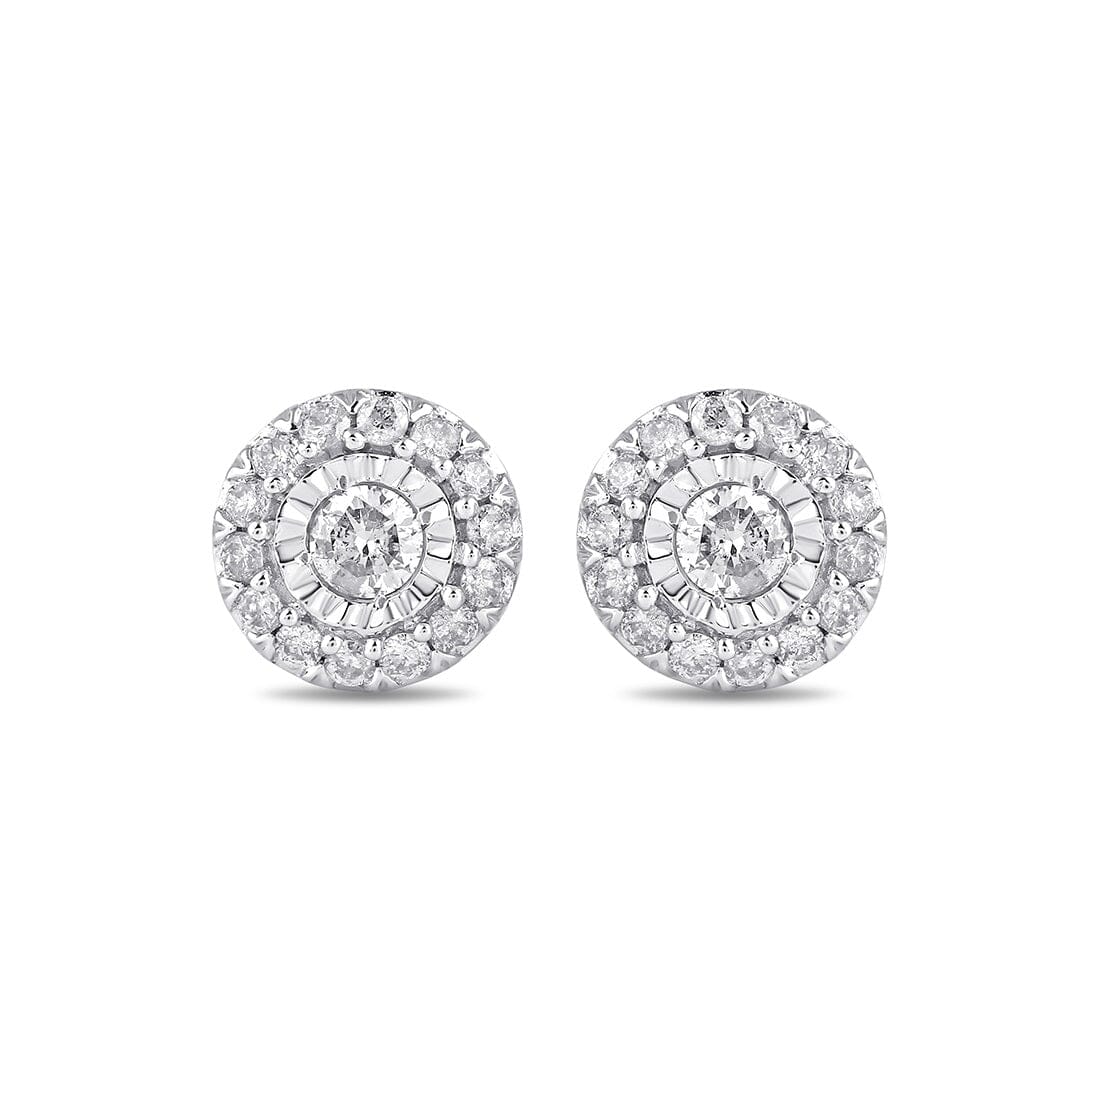 Double Halo Stud Earrings with 1/4ct of Diamonds in Sterling Silver Earrings Bevilles 